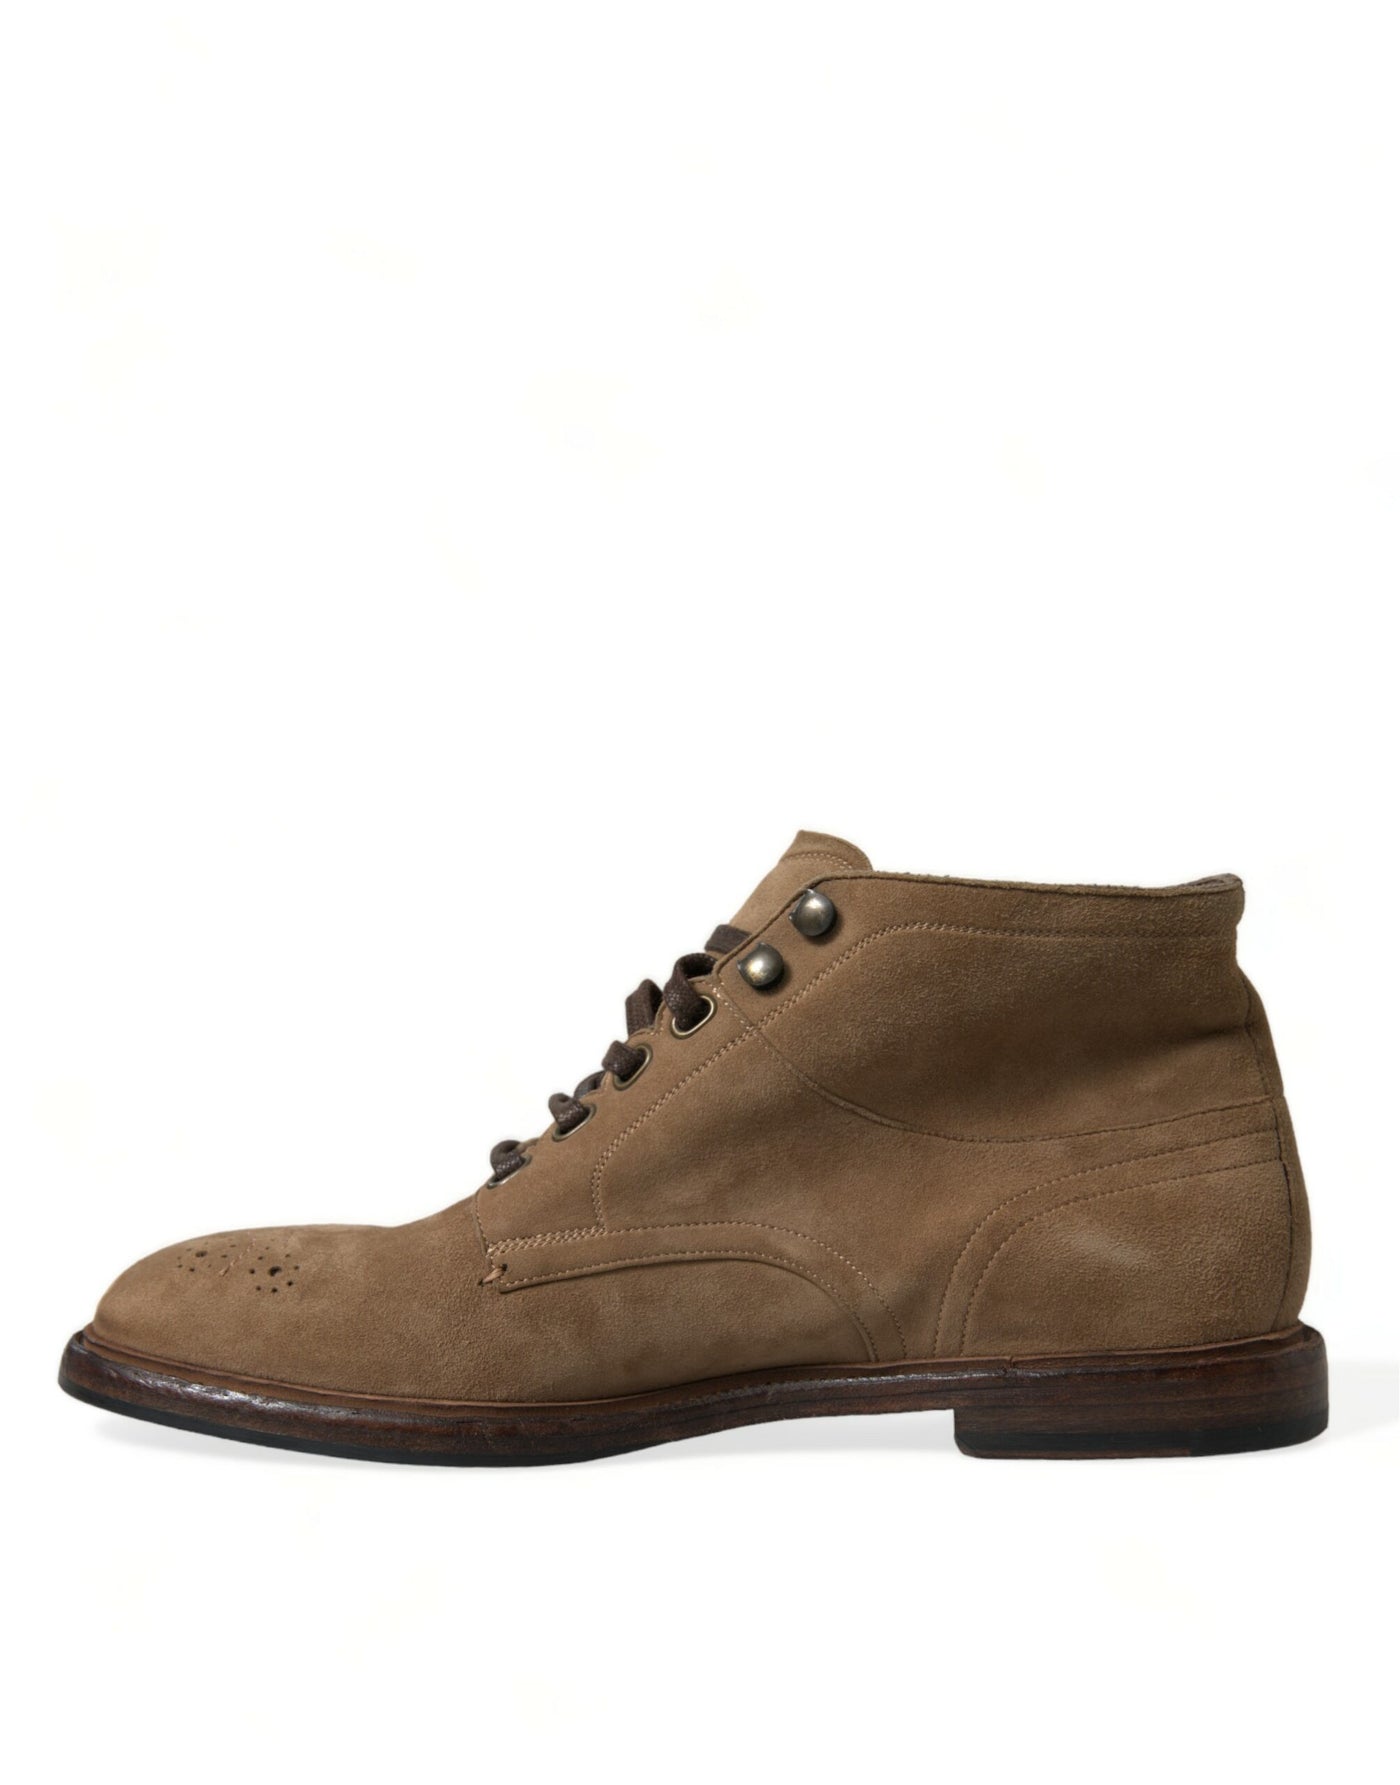 Dolce & Gabbana Brown Leather Lace Up Ankle Boots Shoes